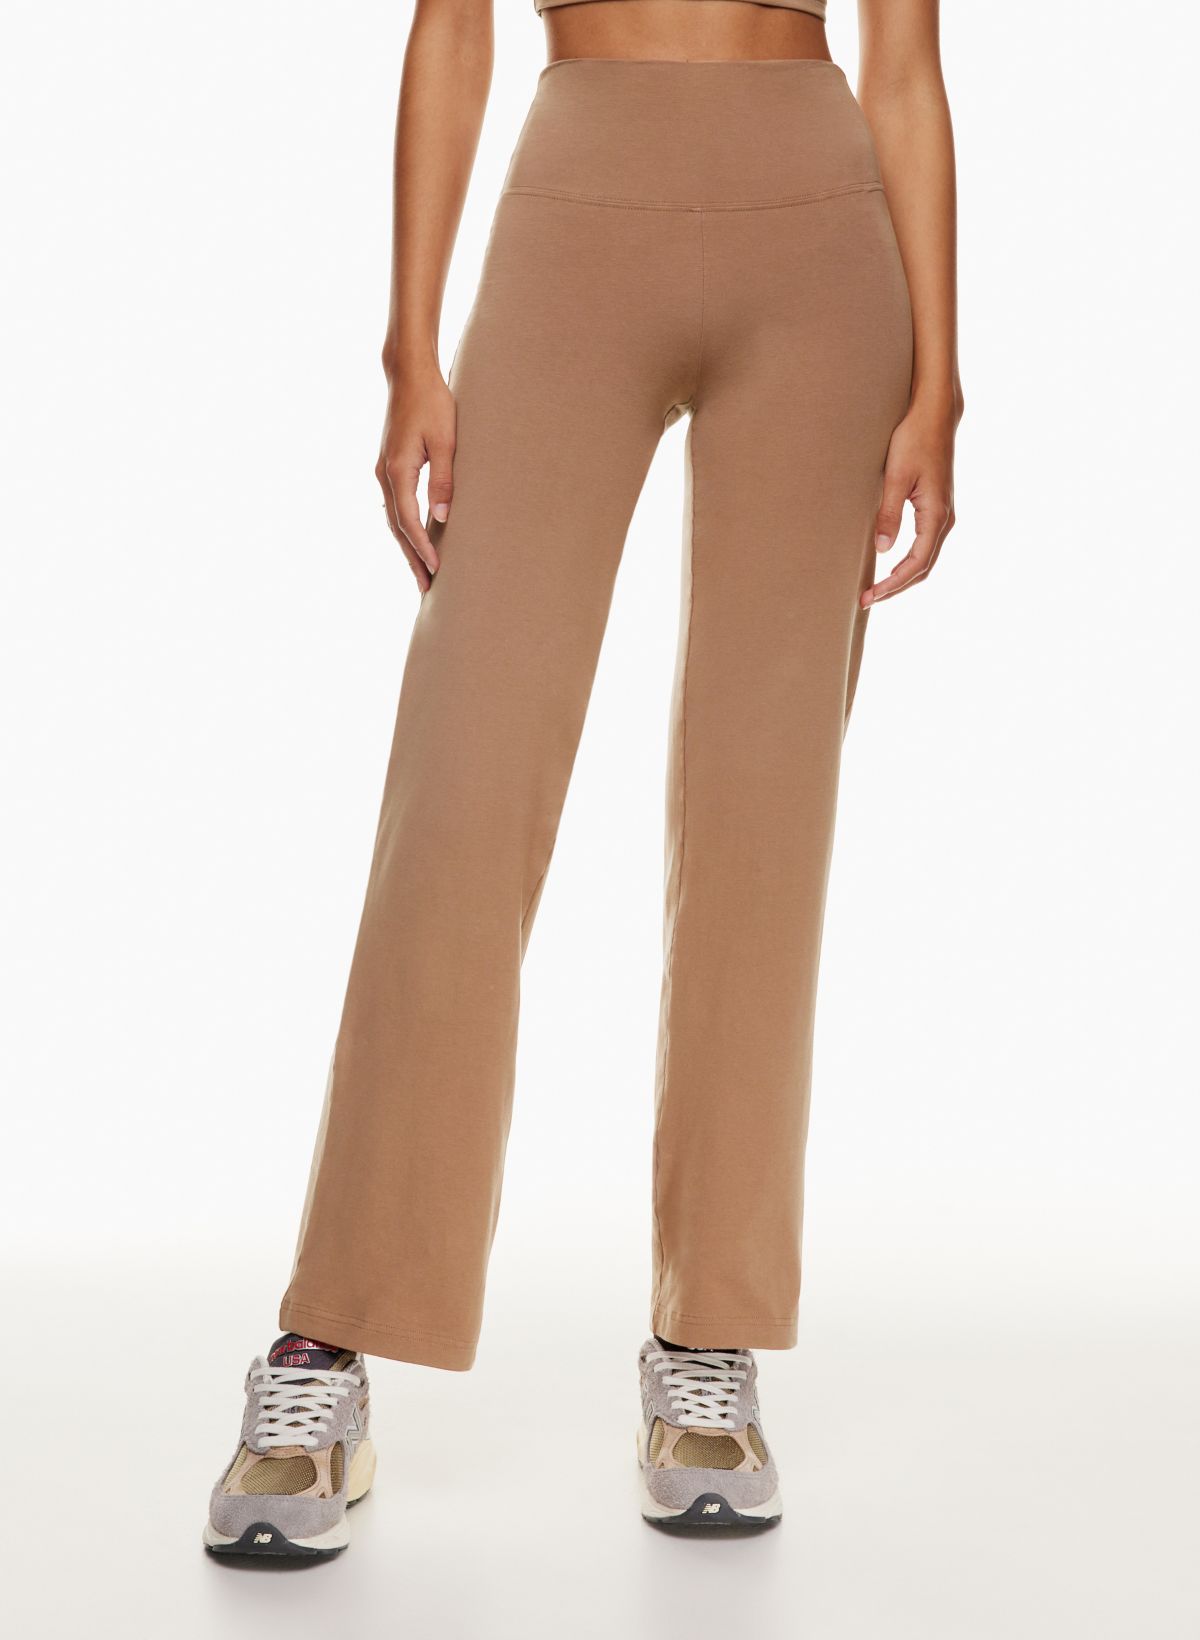 Aritzia TNACHILL™ ATMOSPHERE FLARE HI-RISE LEGGING Pink Size XS - $13 -  From Lindsey